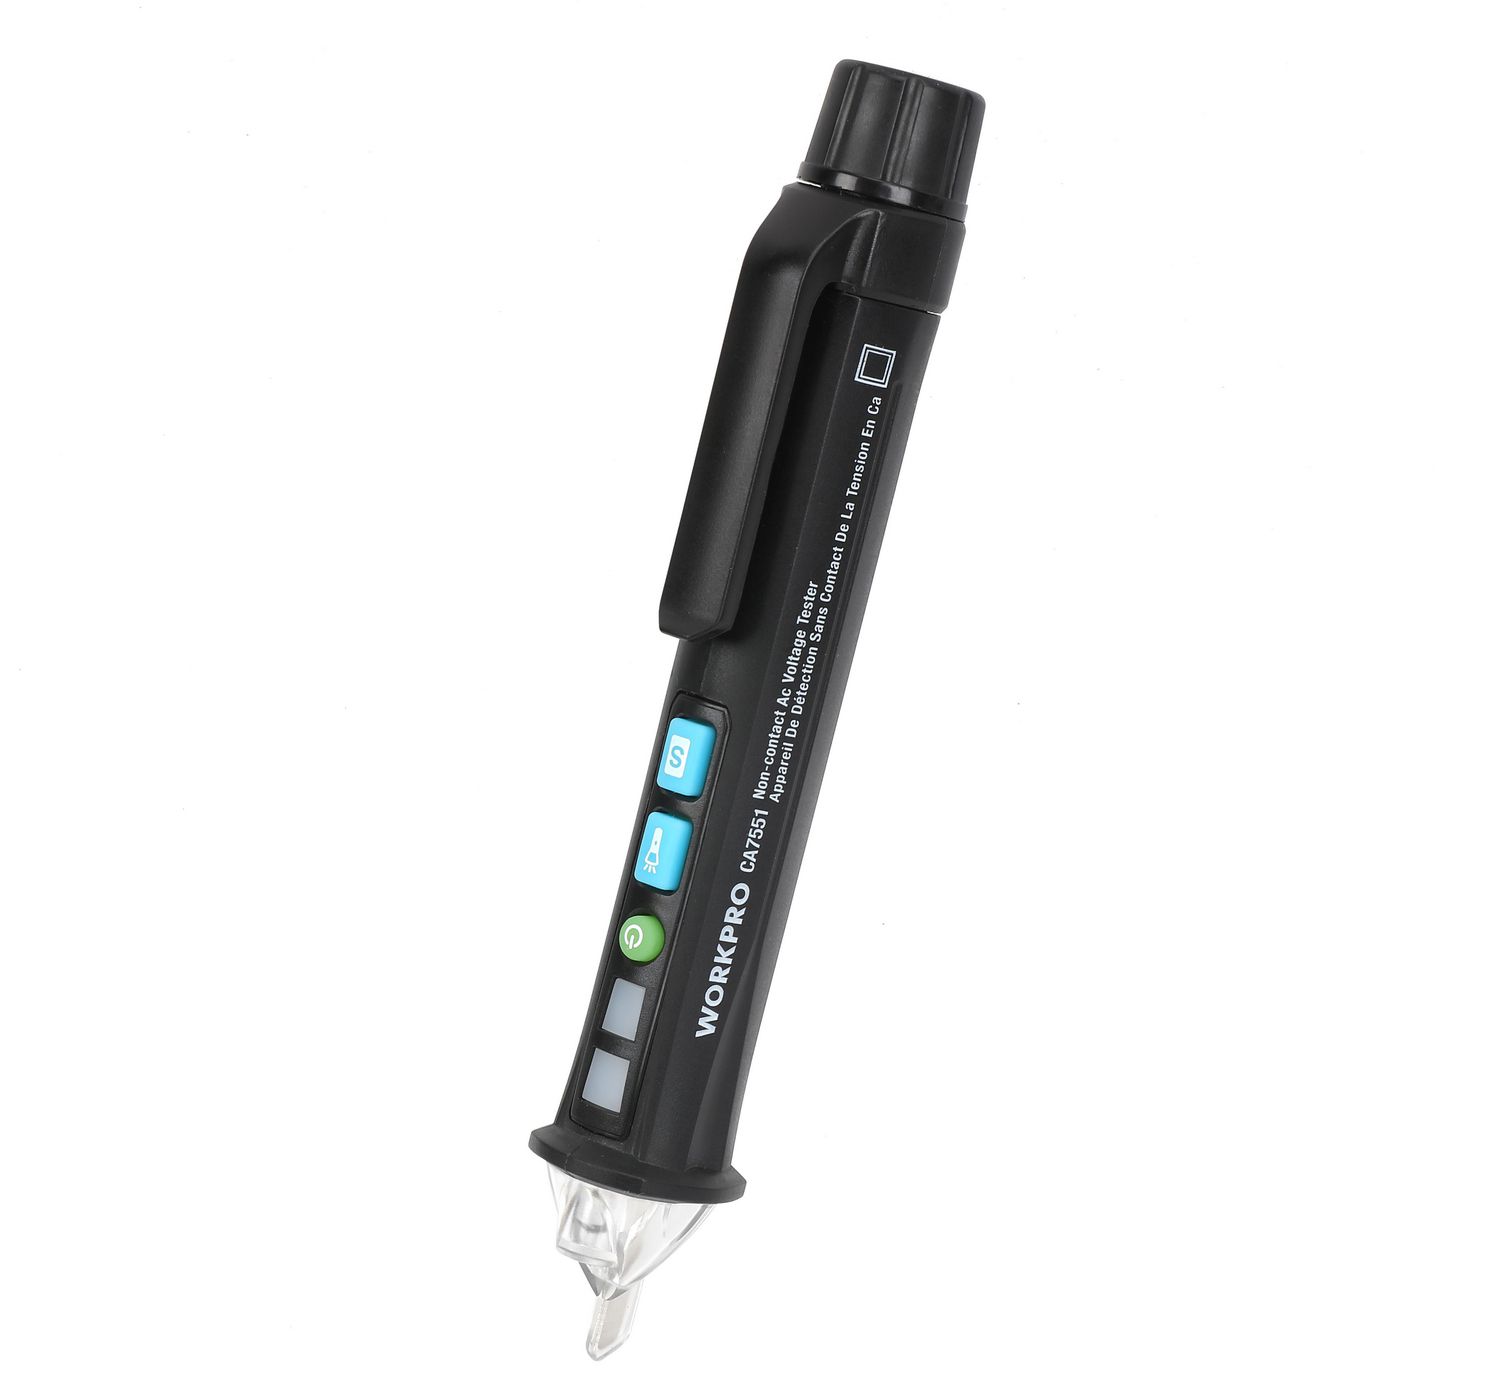 The Best Non-Contact Voltage Tester